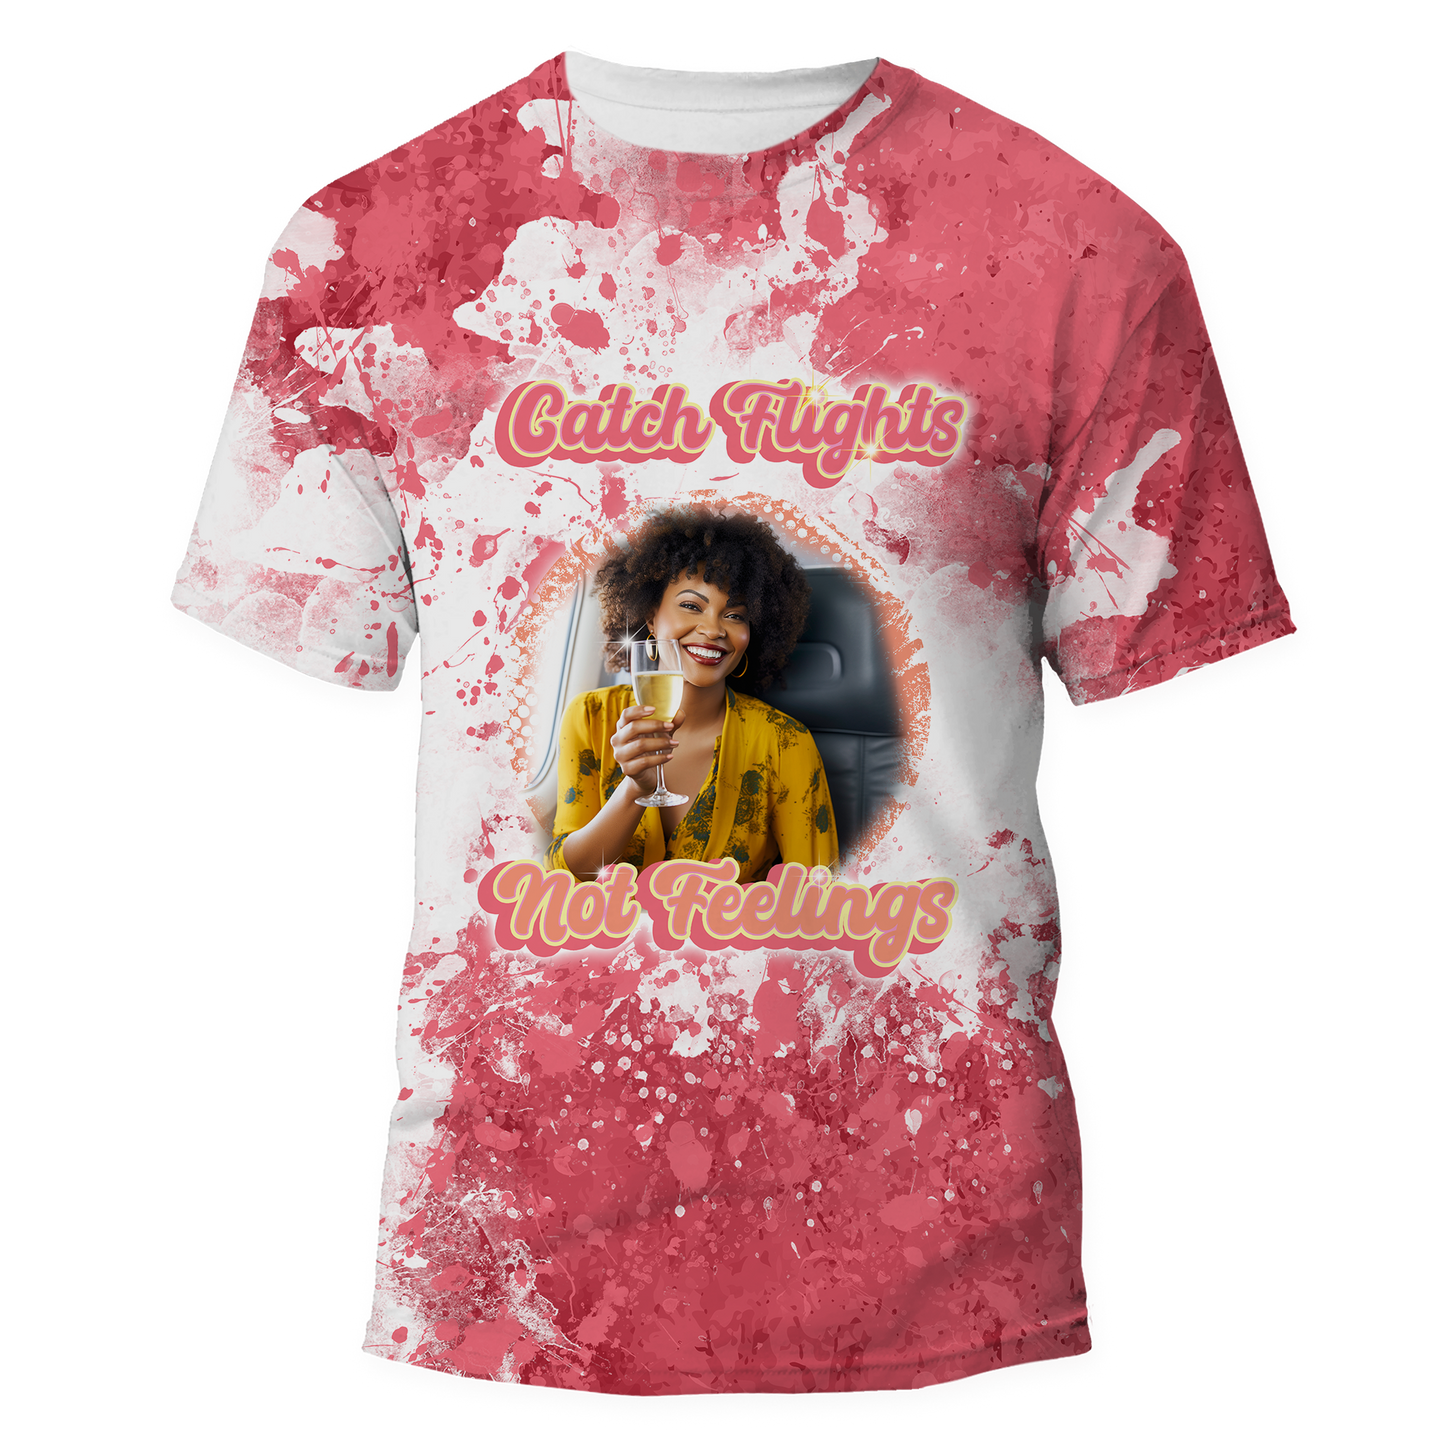 Girls Trip Premium Shirt All Over - Front Only